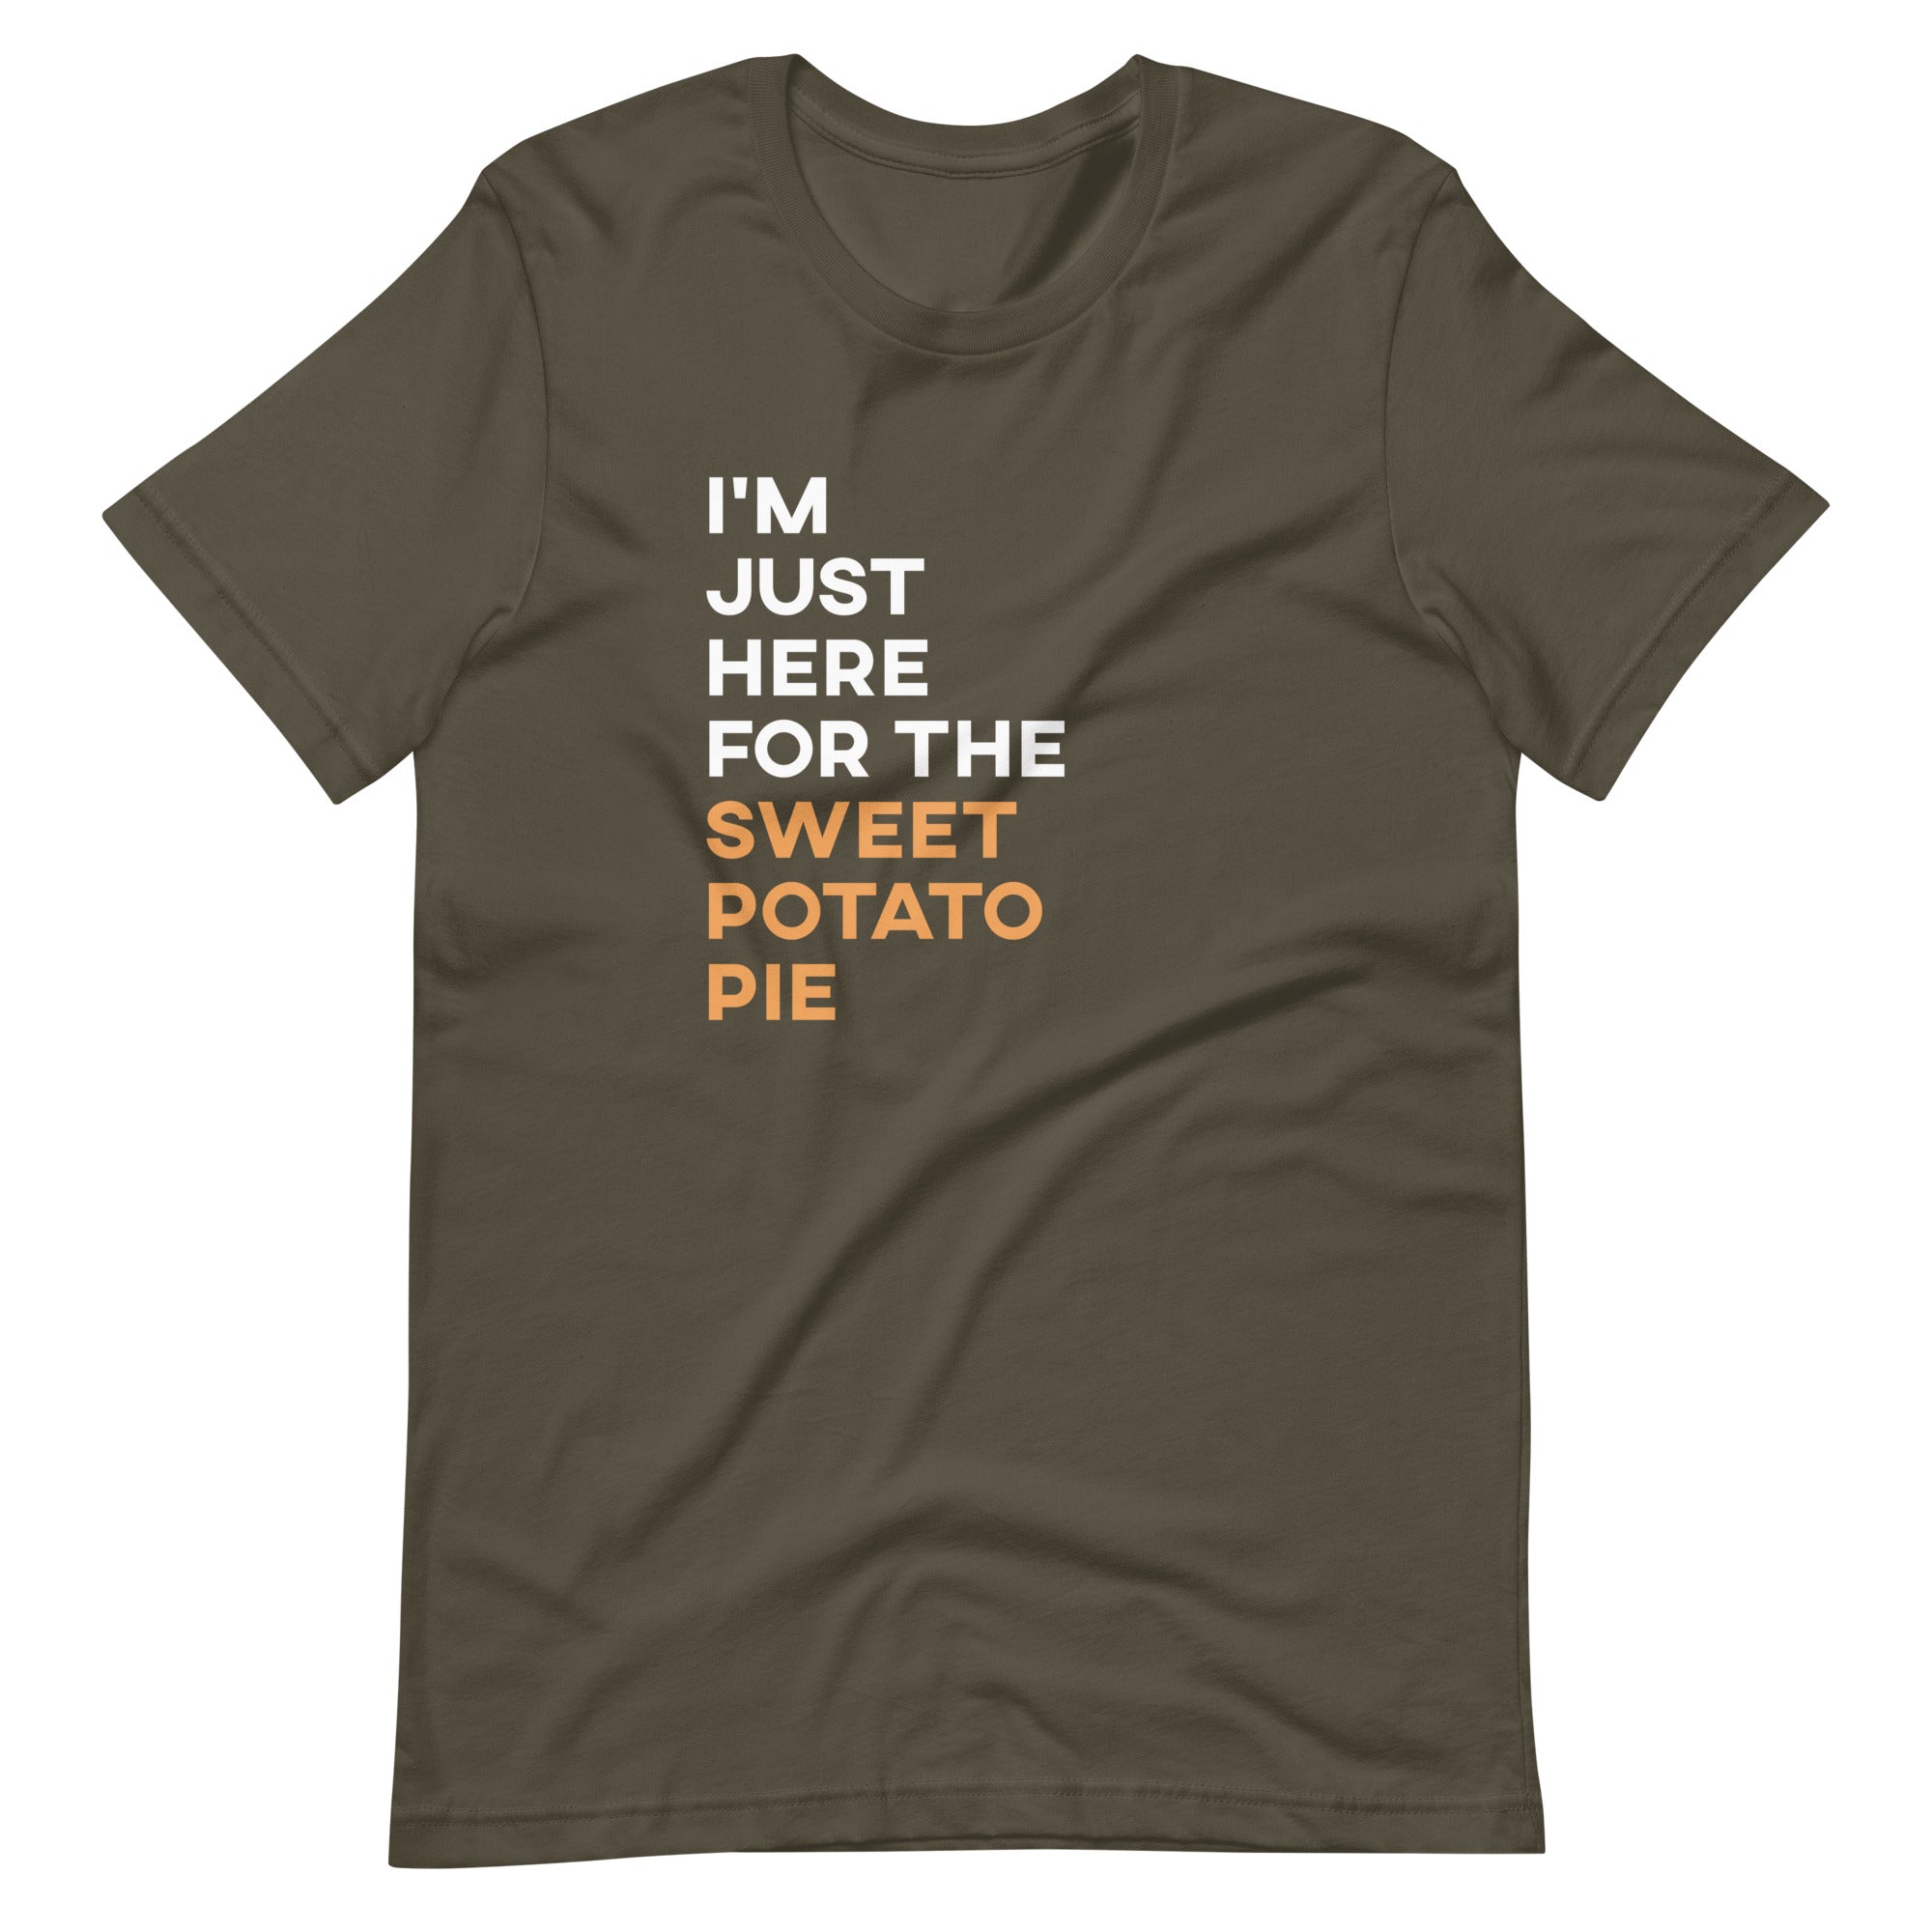 Mike Sorrentino Just Here For The Sweet Potato Pie Shirt